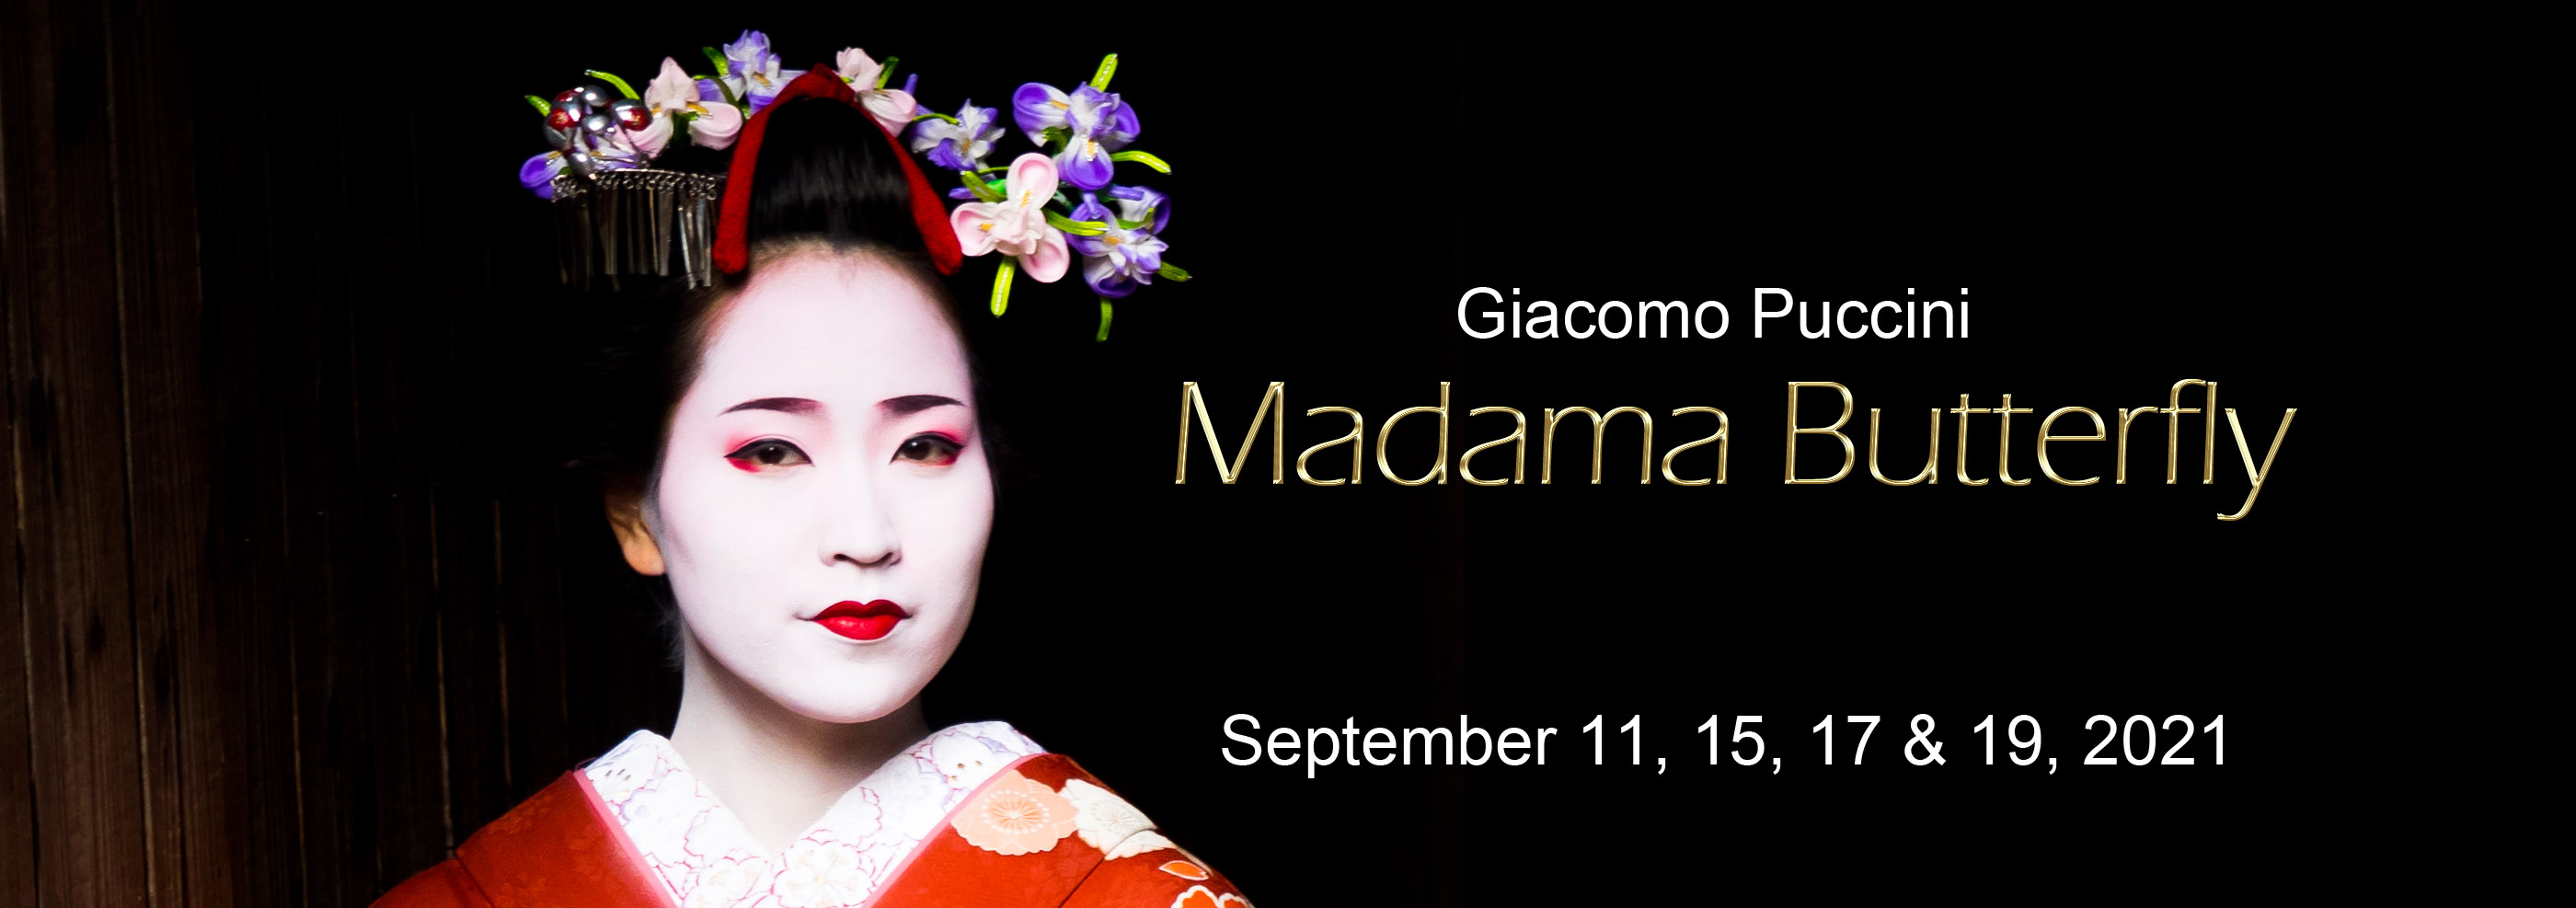 Madama Butterfly 2021 graphic